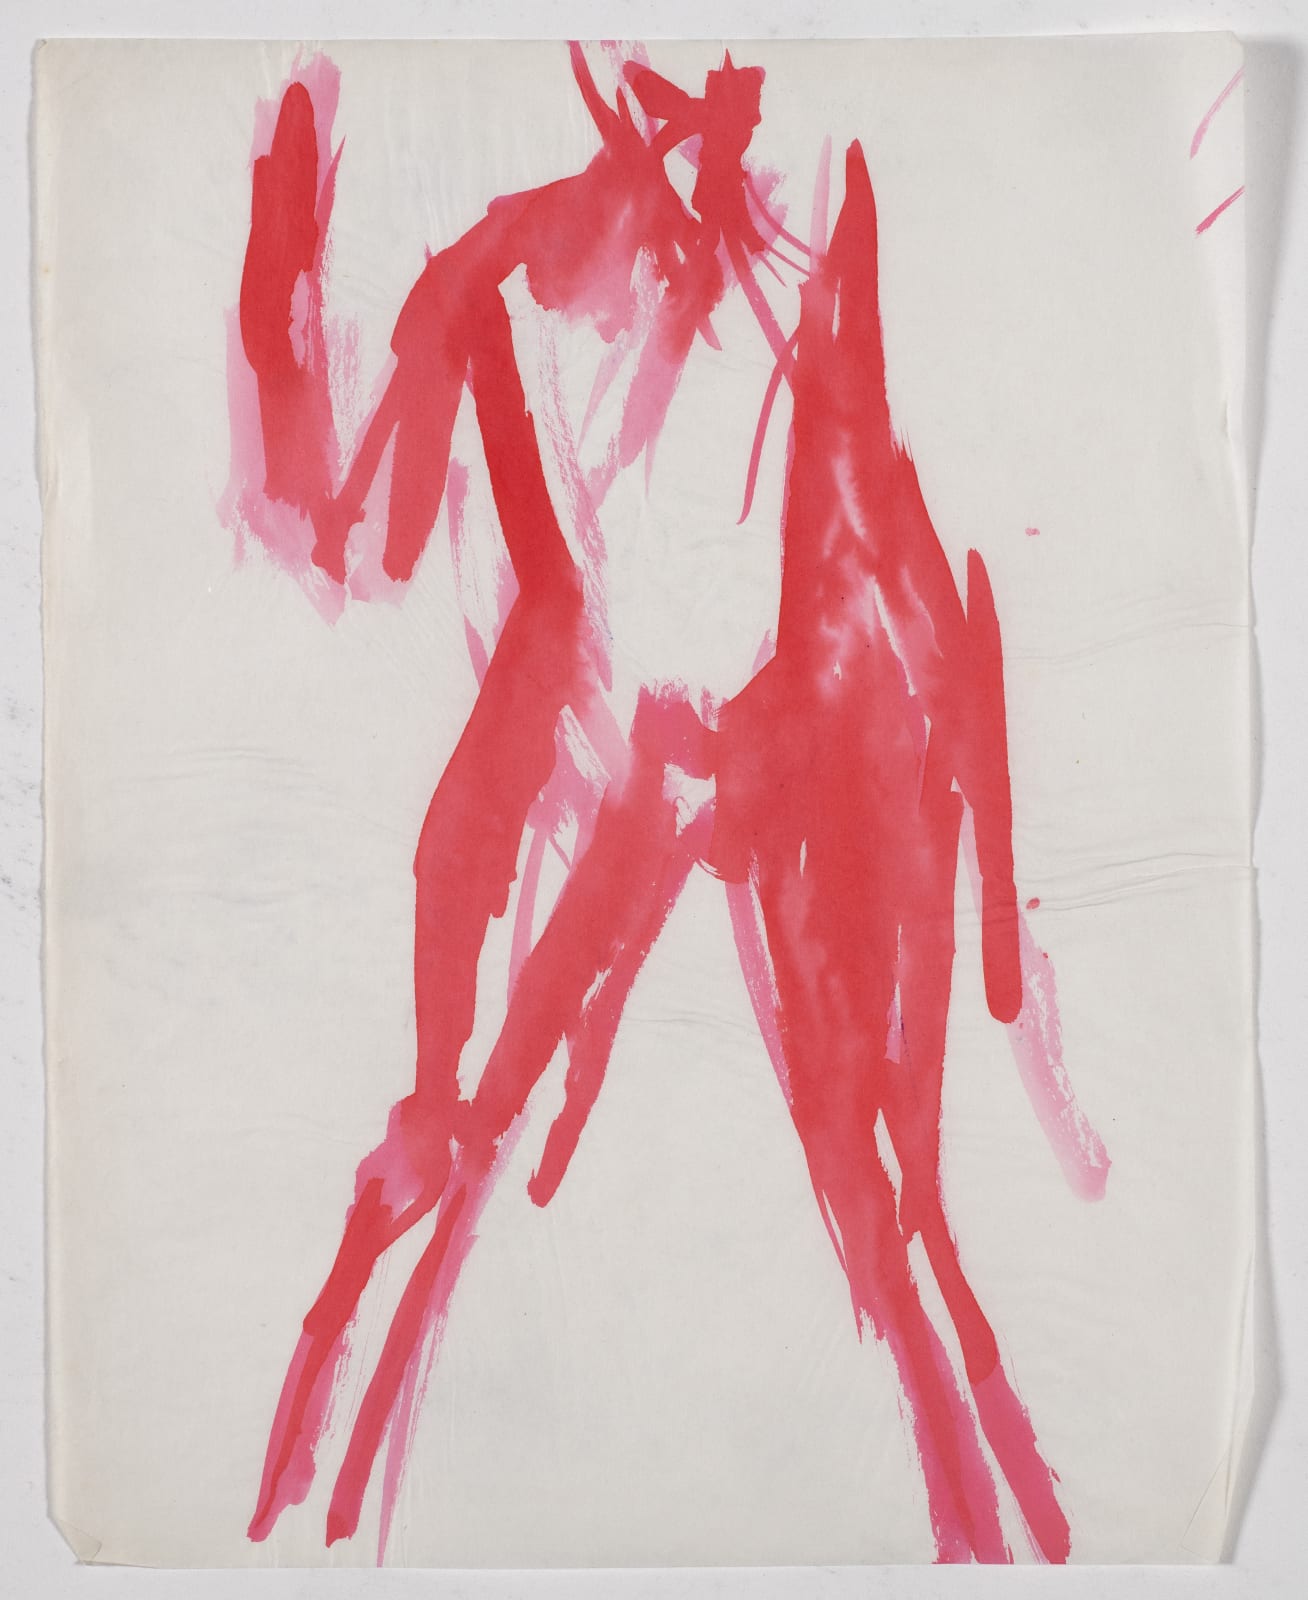 Standing Nude, c. 1950s Ink on paper 17.3 x 21.2cm The Gustav Metzger Foundation